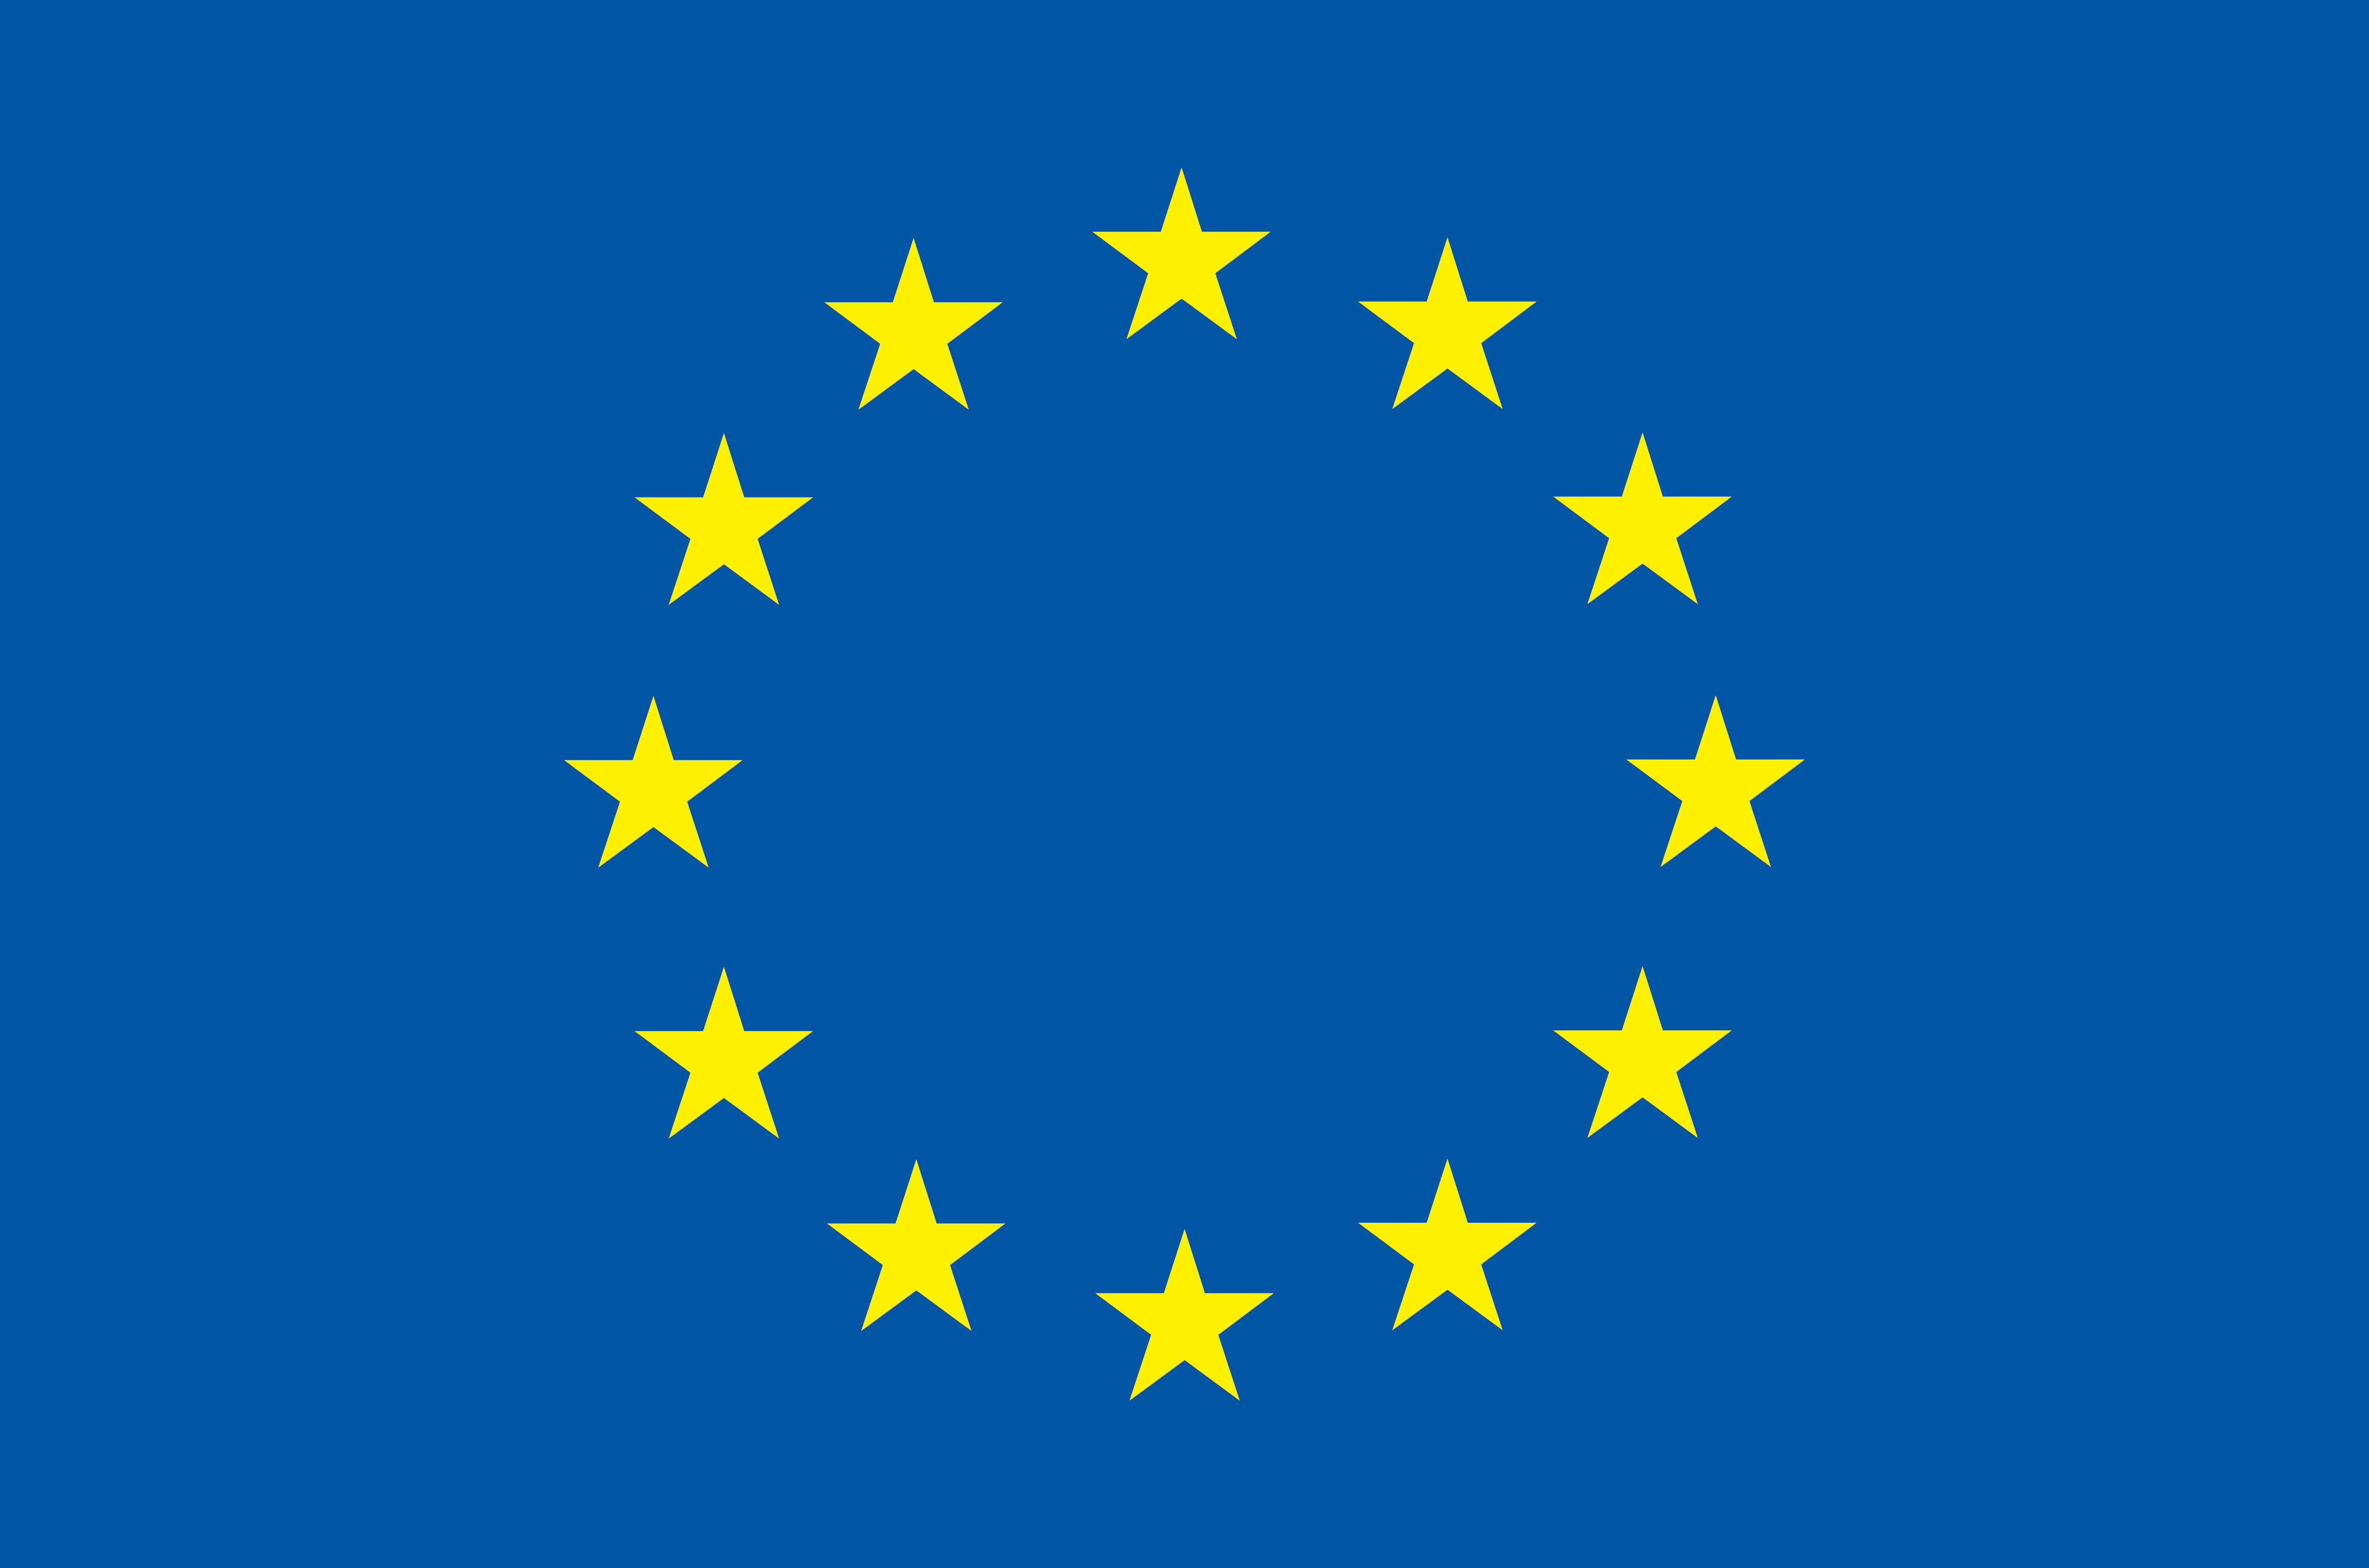 EU flag in royal blue with 12 yellow stars displayed in a circle